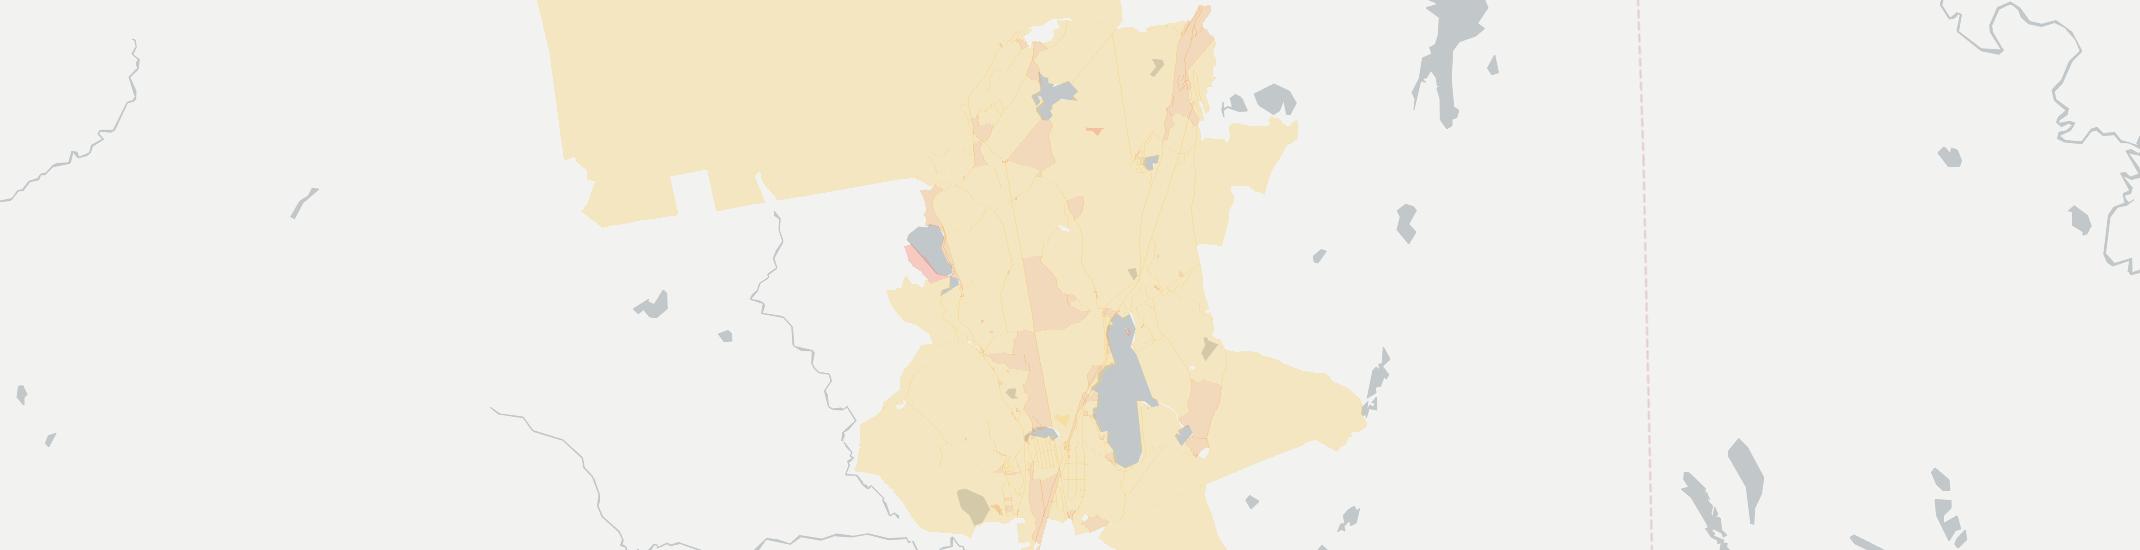 Silver Lake Internet Competition Map. Click for interactive map